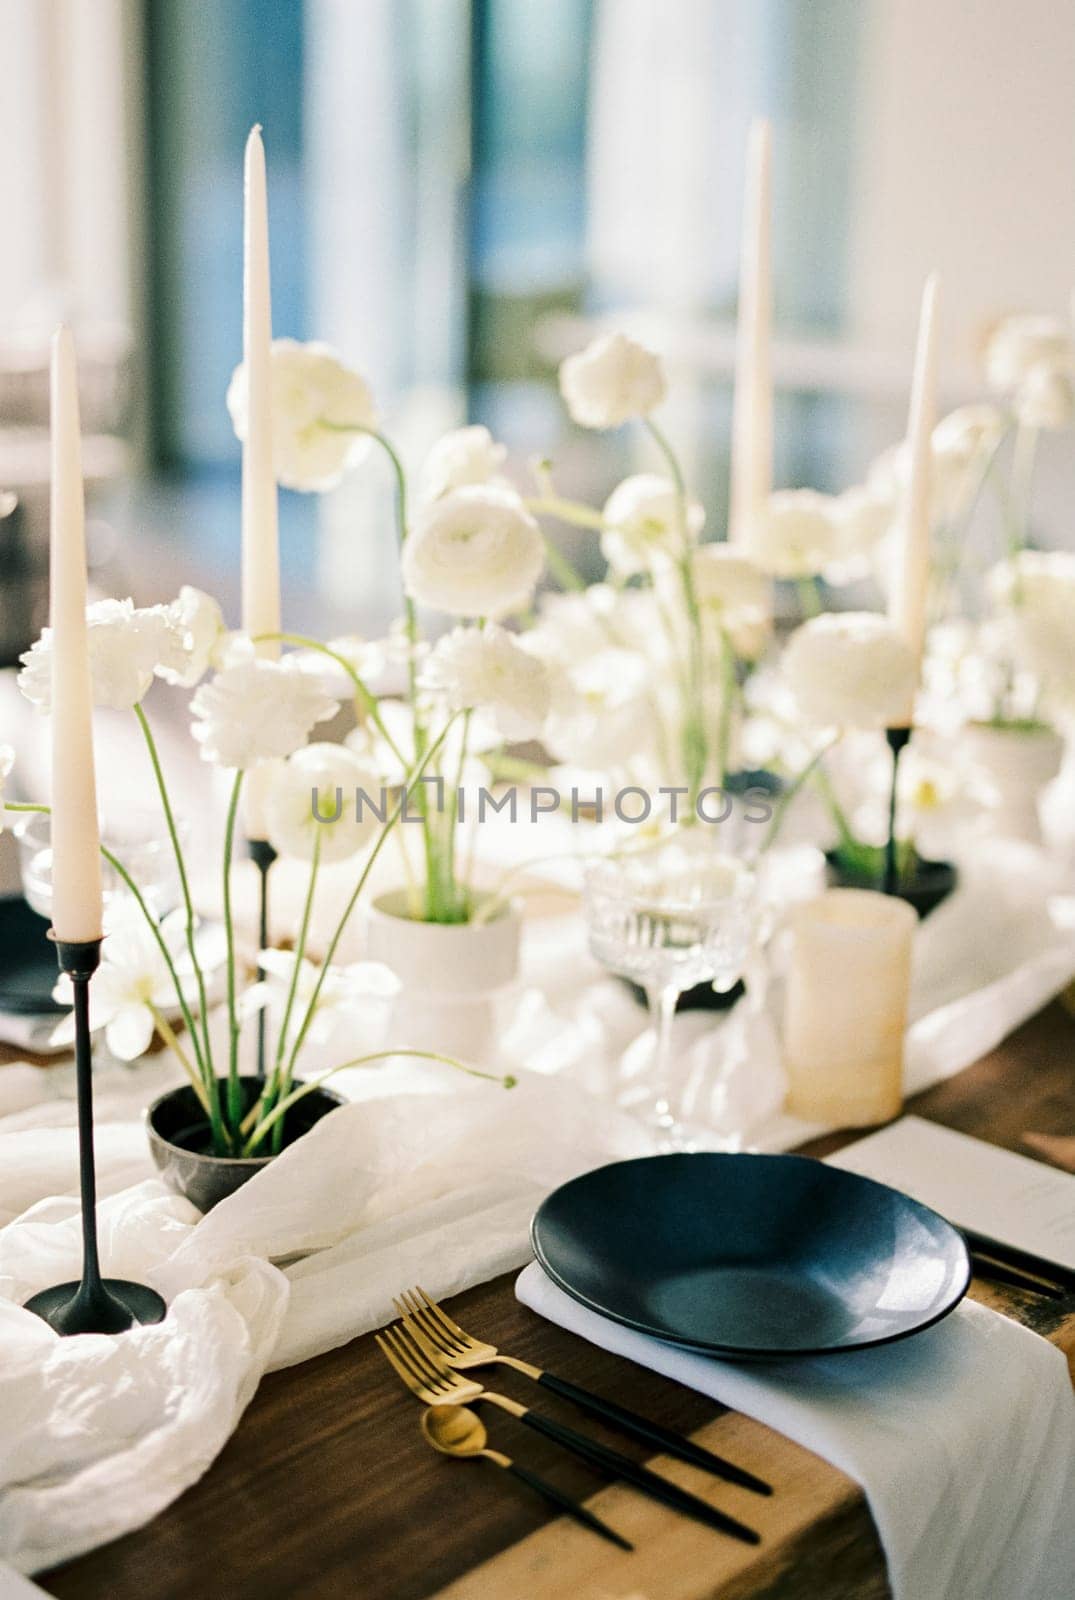 Black plates stand on a wooden table next to white bouquets of flowers on a narrow tablecloth by Nadtochiy